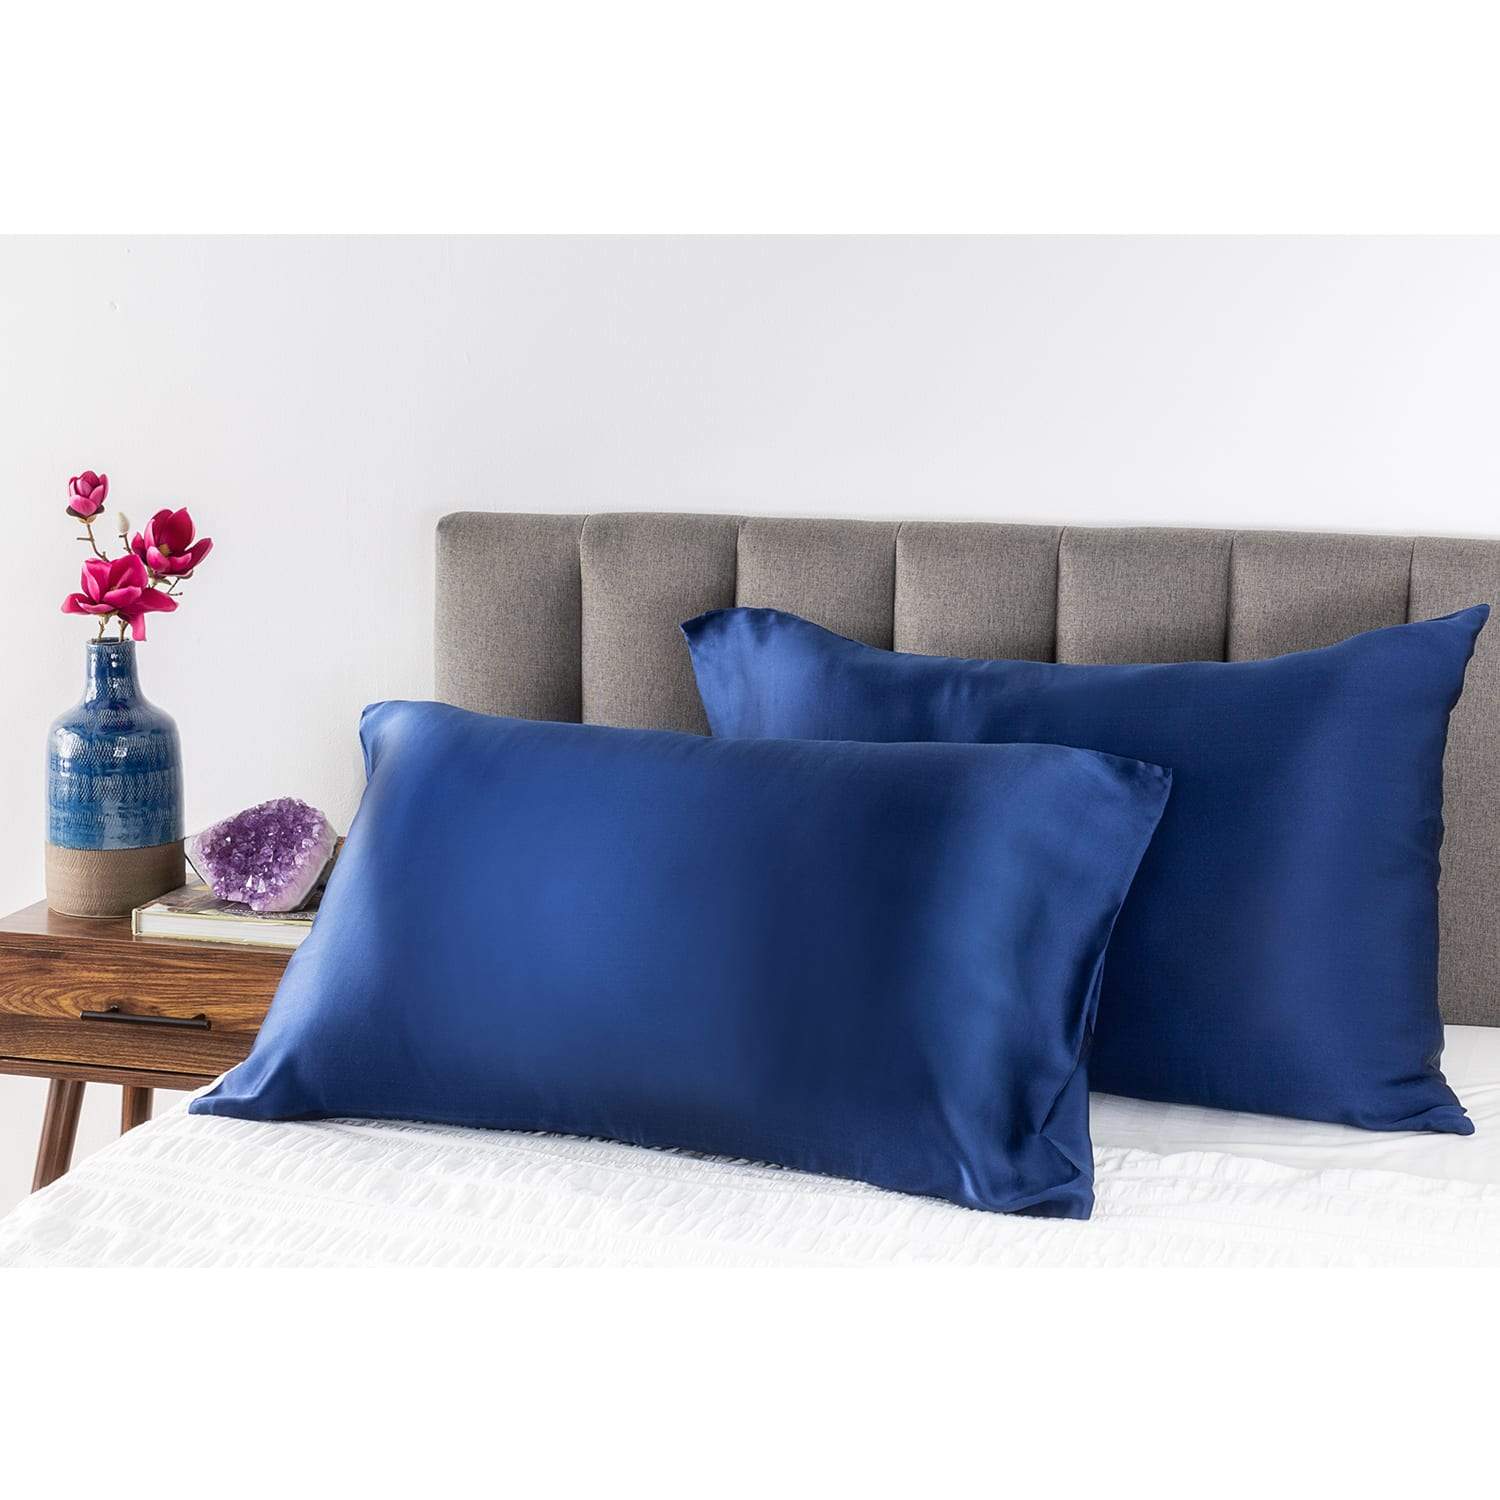 Midnight Blue Youth Silk Pillow Case on pillows in a bed